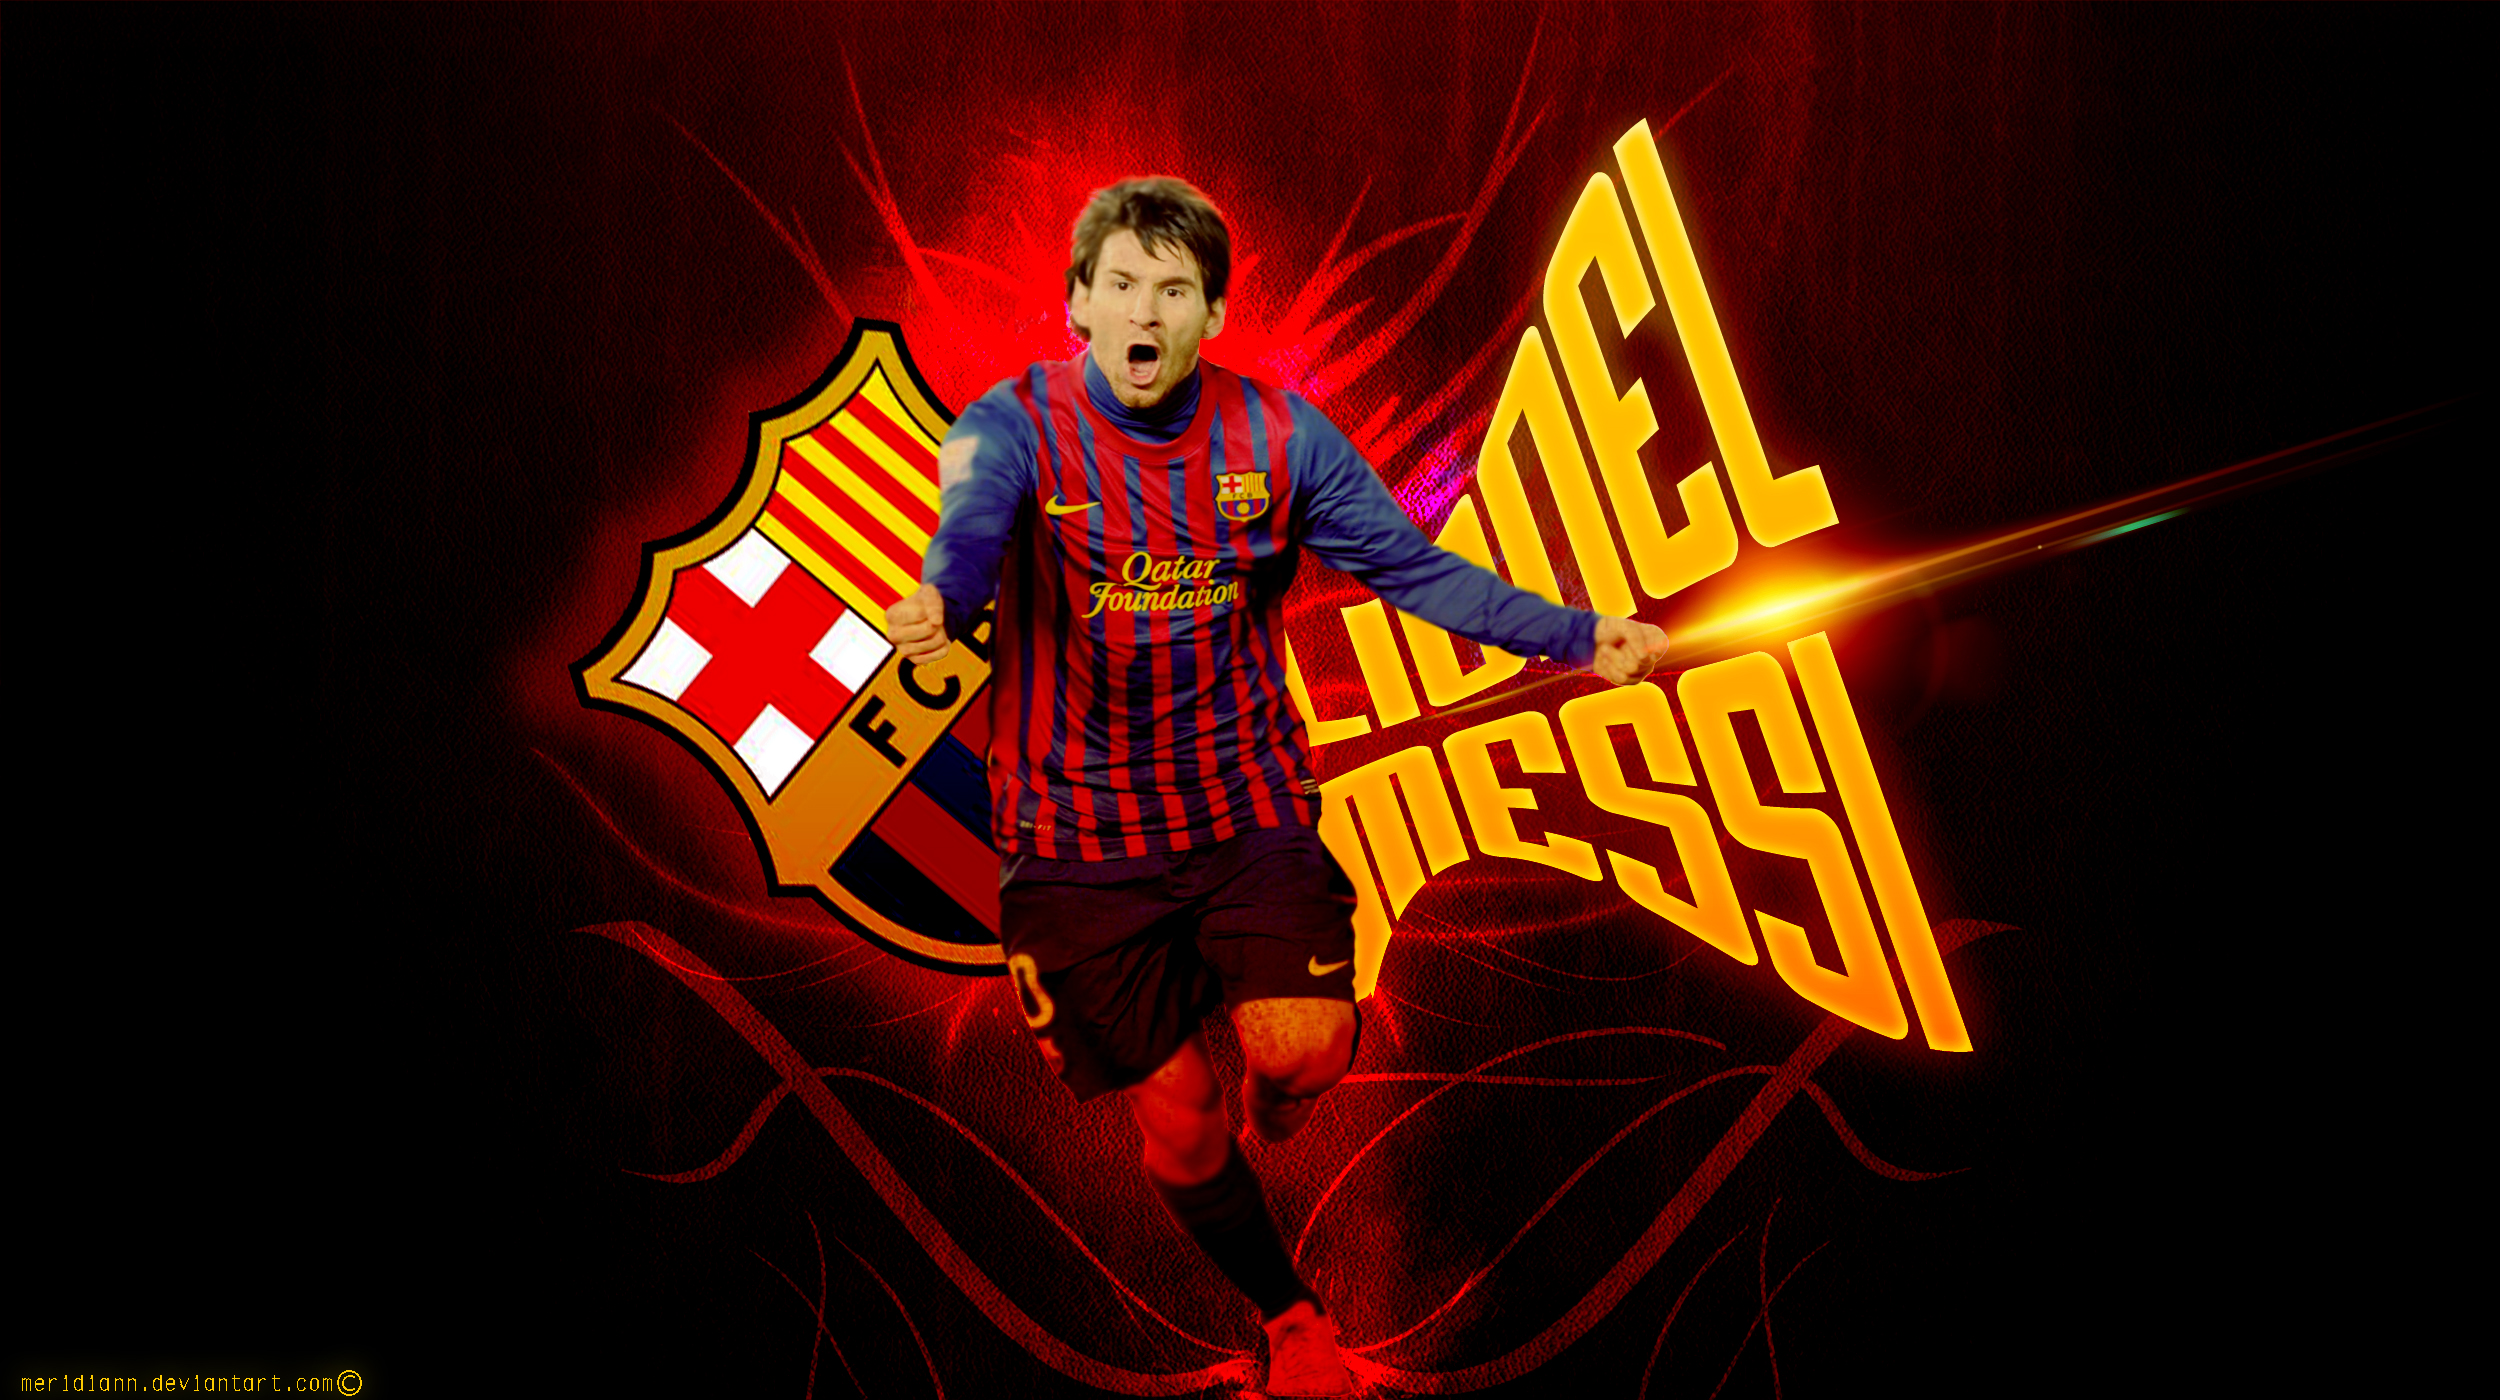 lionel_messi_by_meridiann-d4ulgqw.jpg